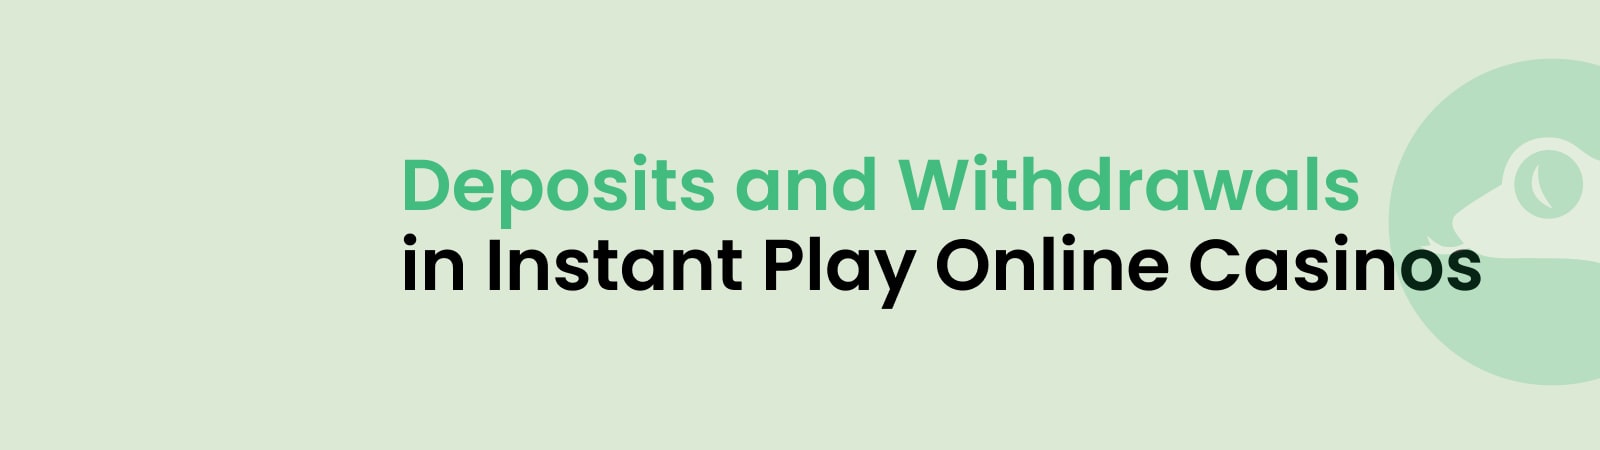 deposits and withdrawals in instant play online casinos